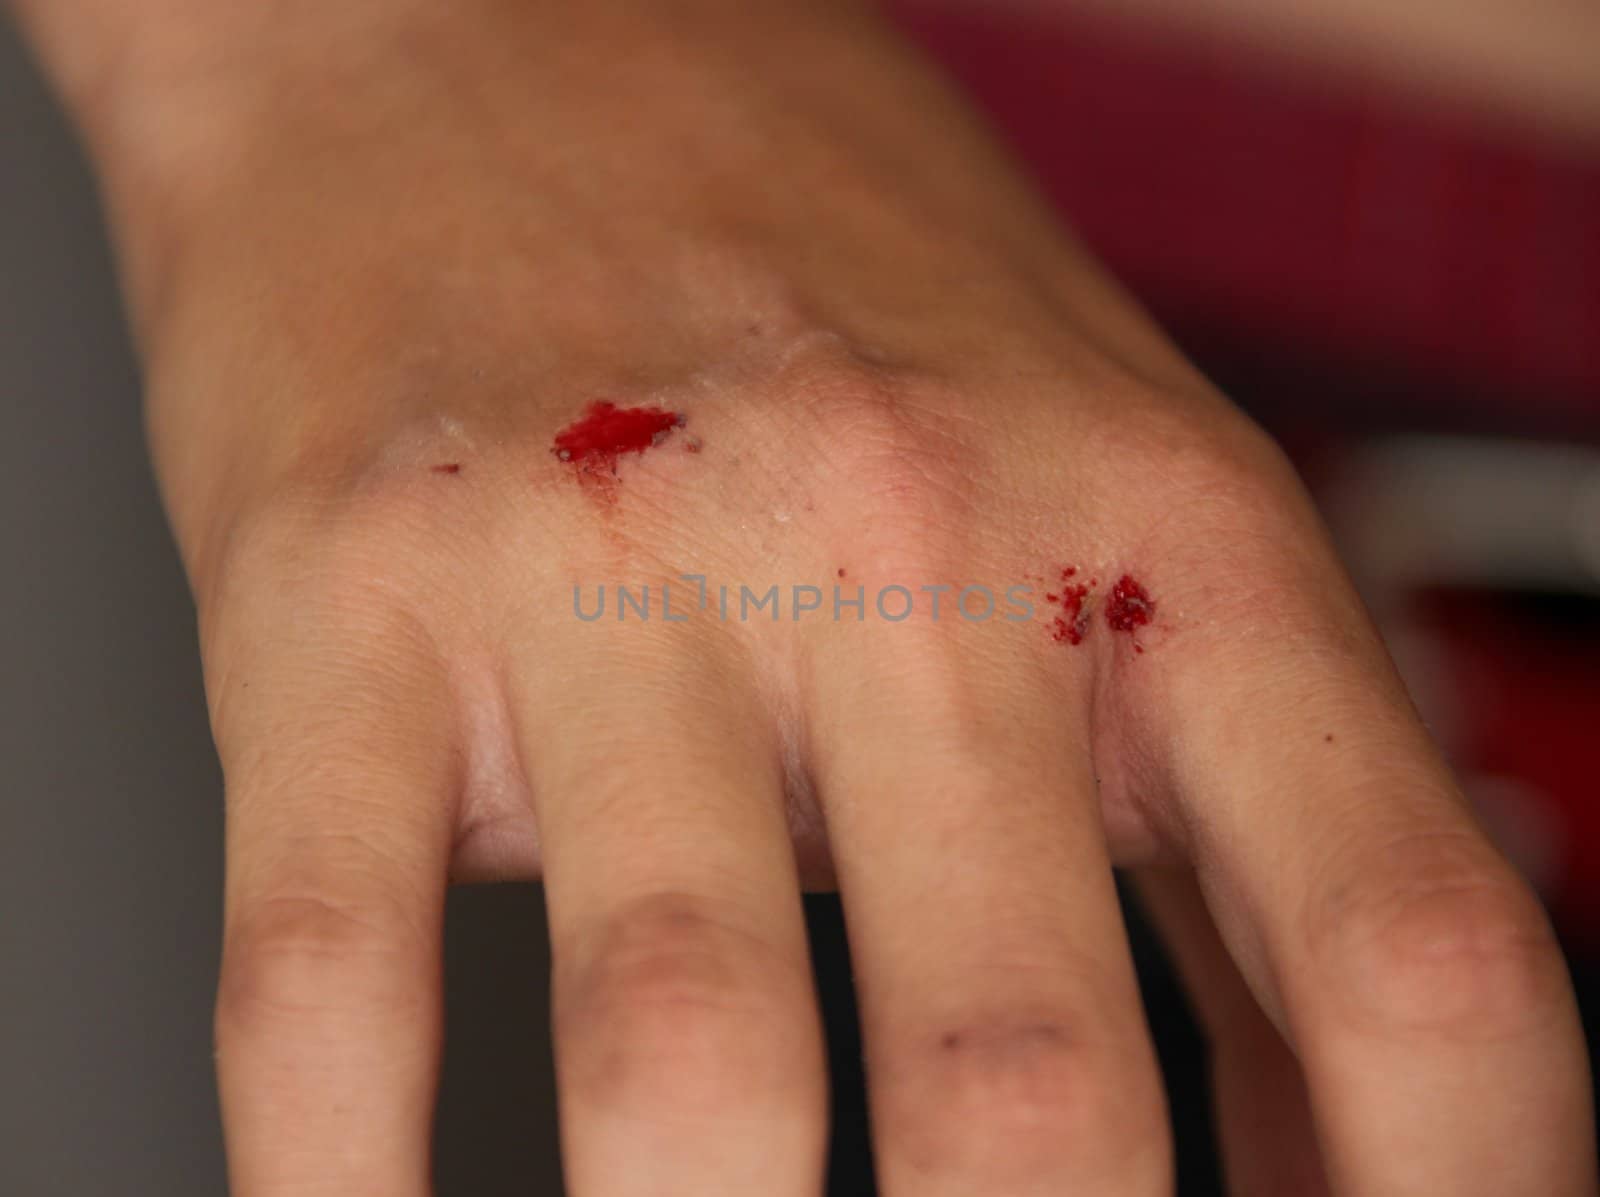 Injured Bleeding Hand of a Young Boy